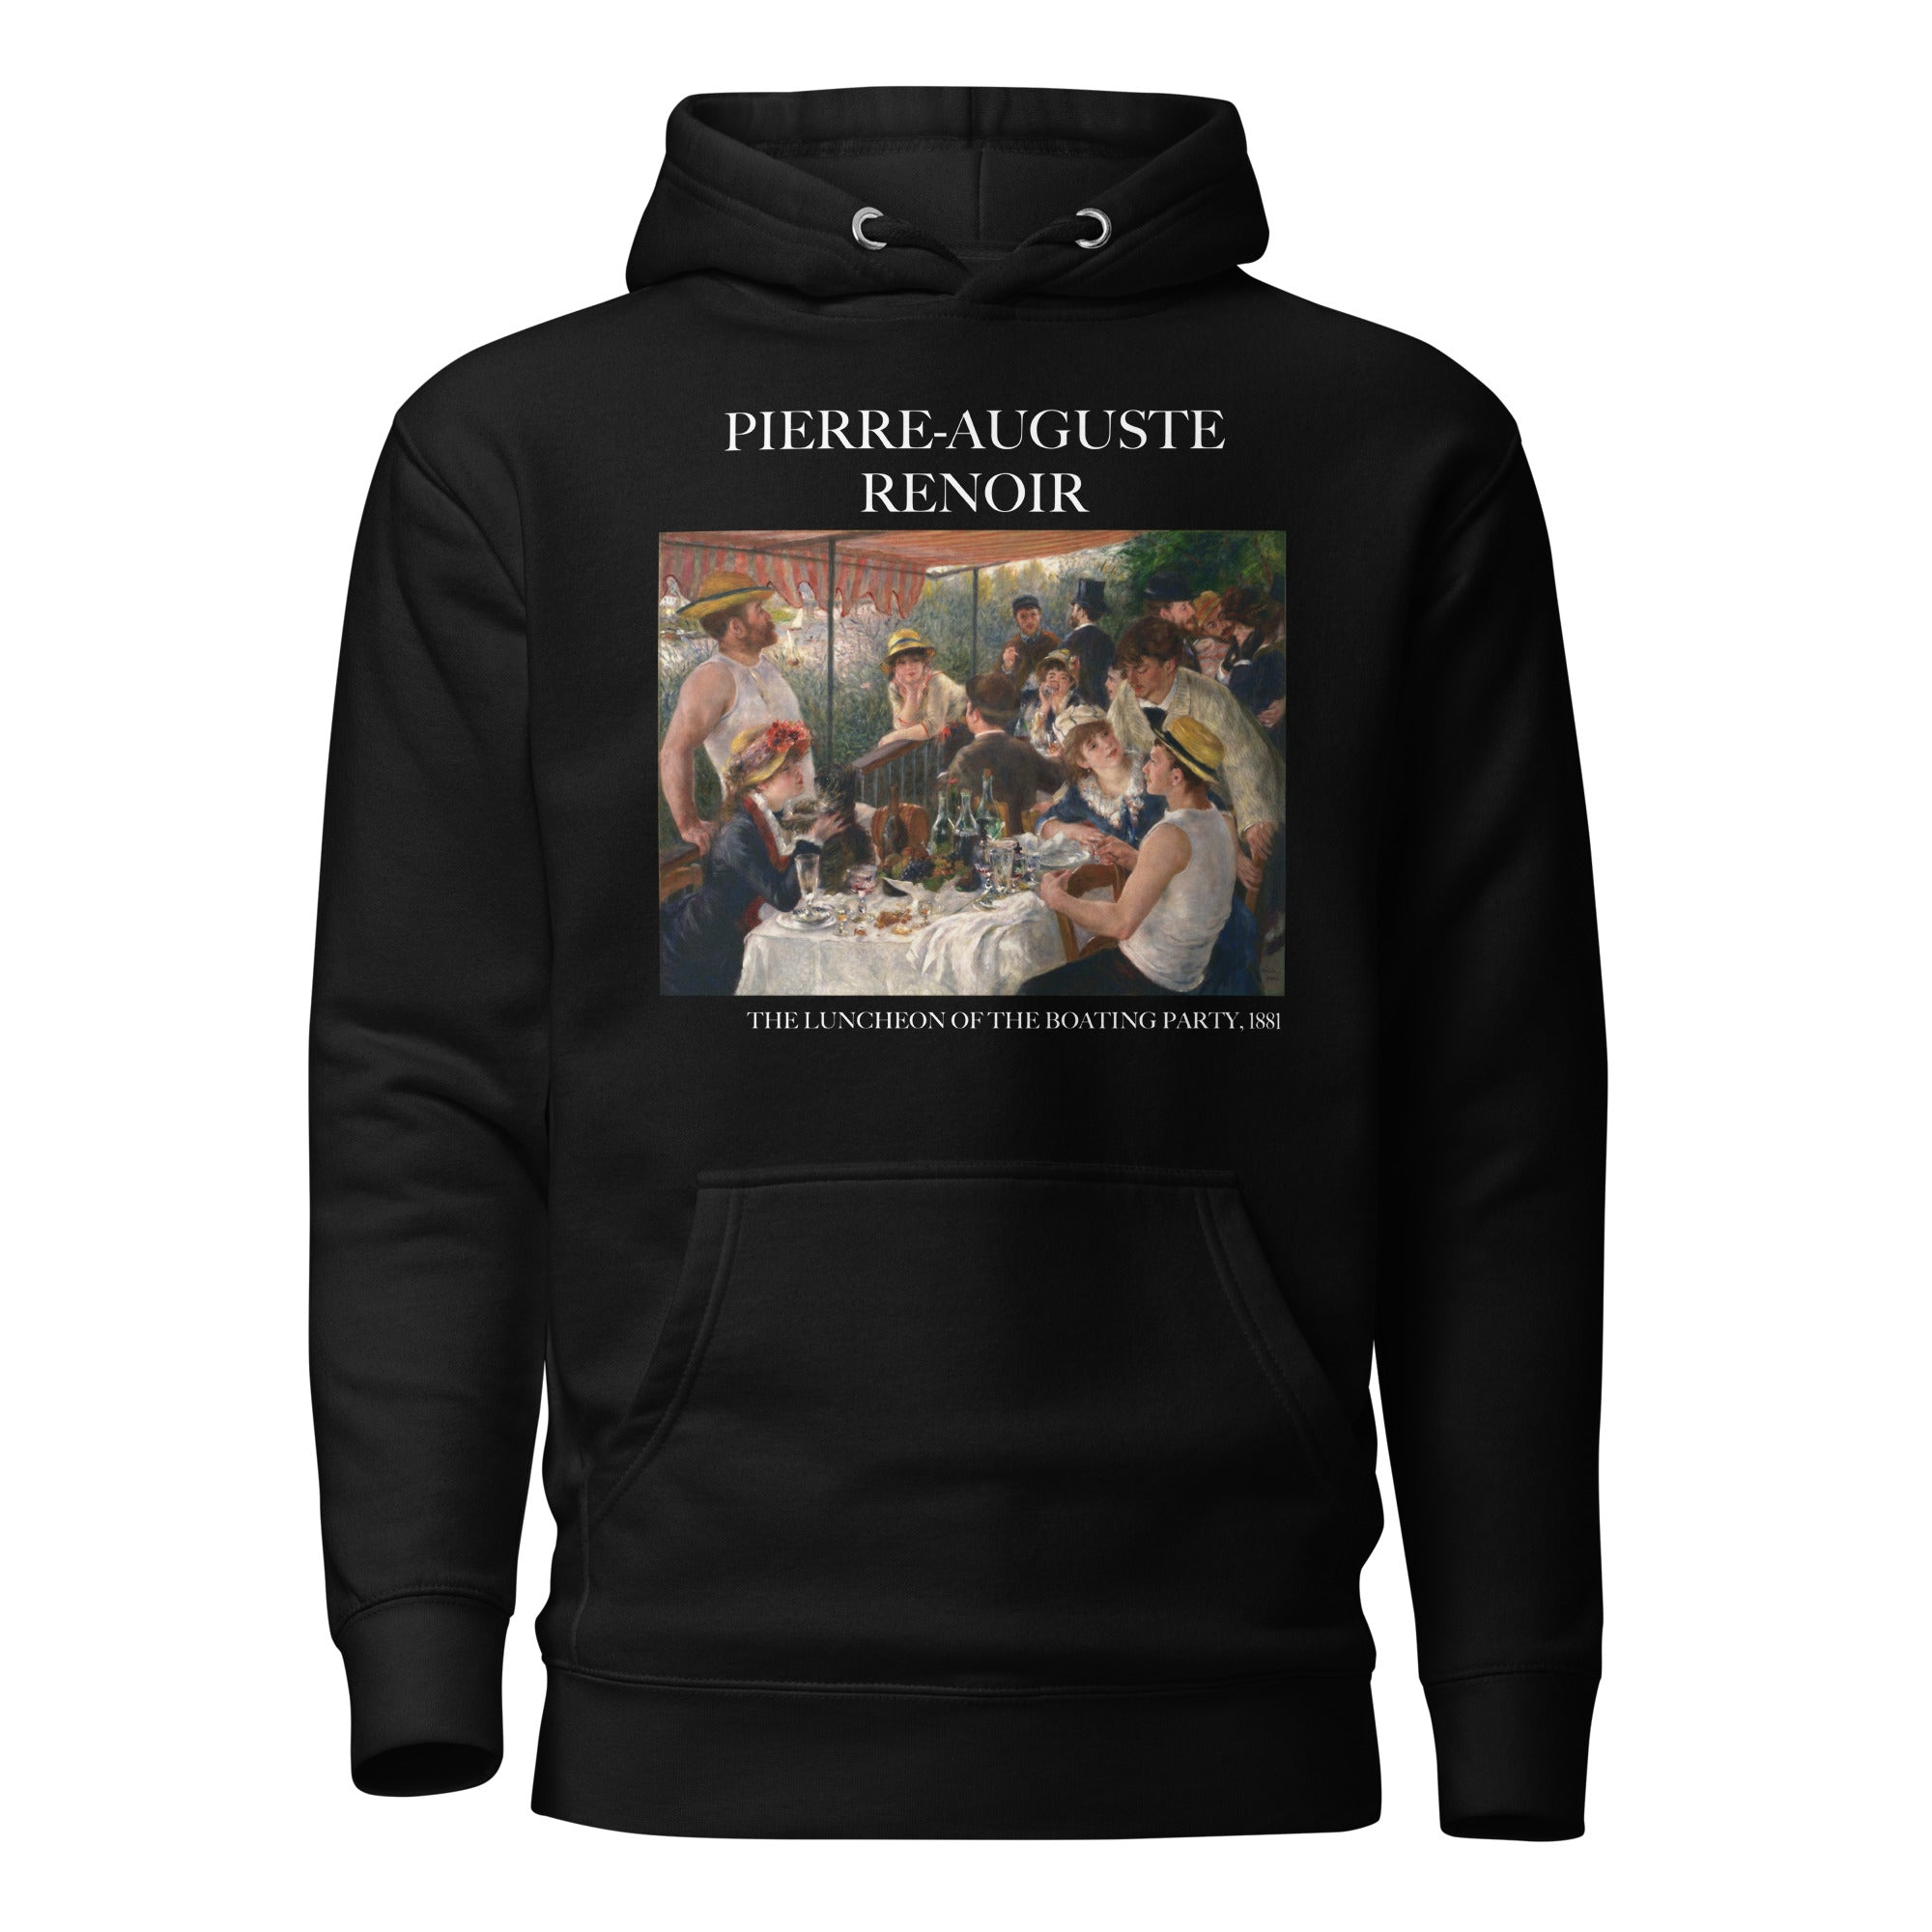 Pierre-Auguste Renoir 'The Luncheon of the Boating Party' Famous Painting Hoodie | Unisex Premium Art Hoodie